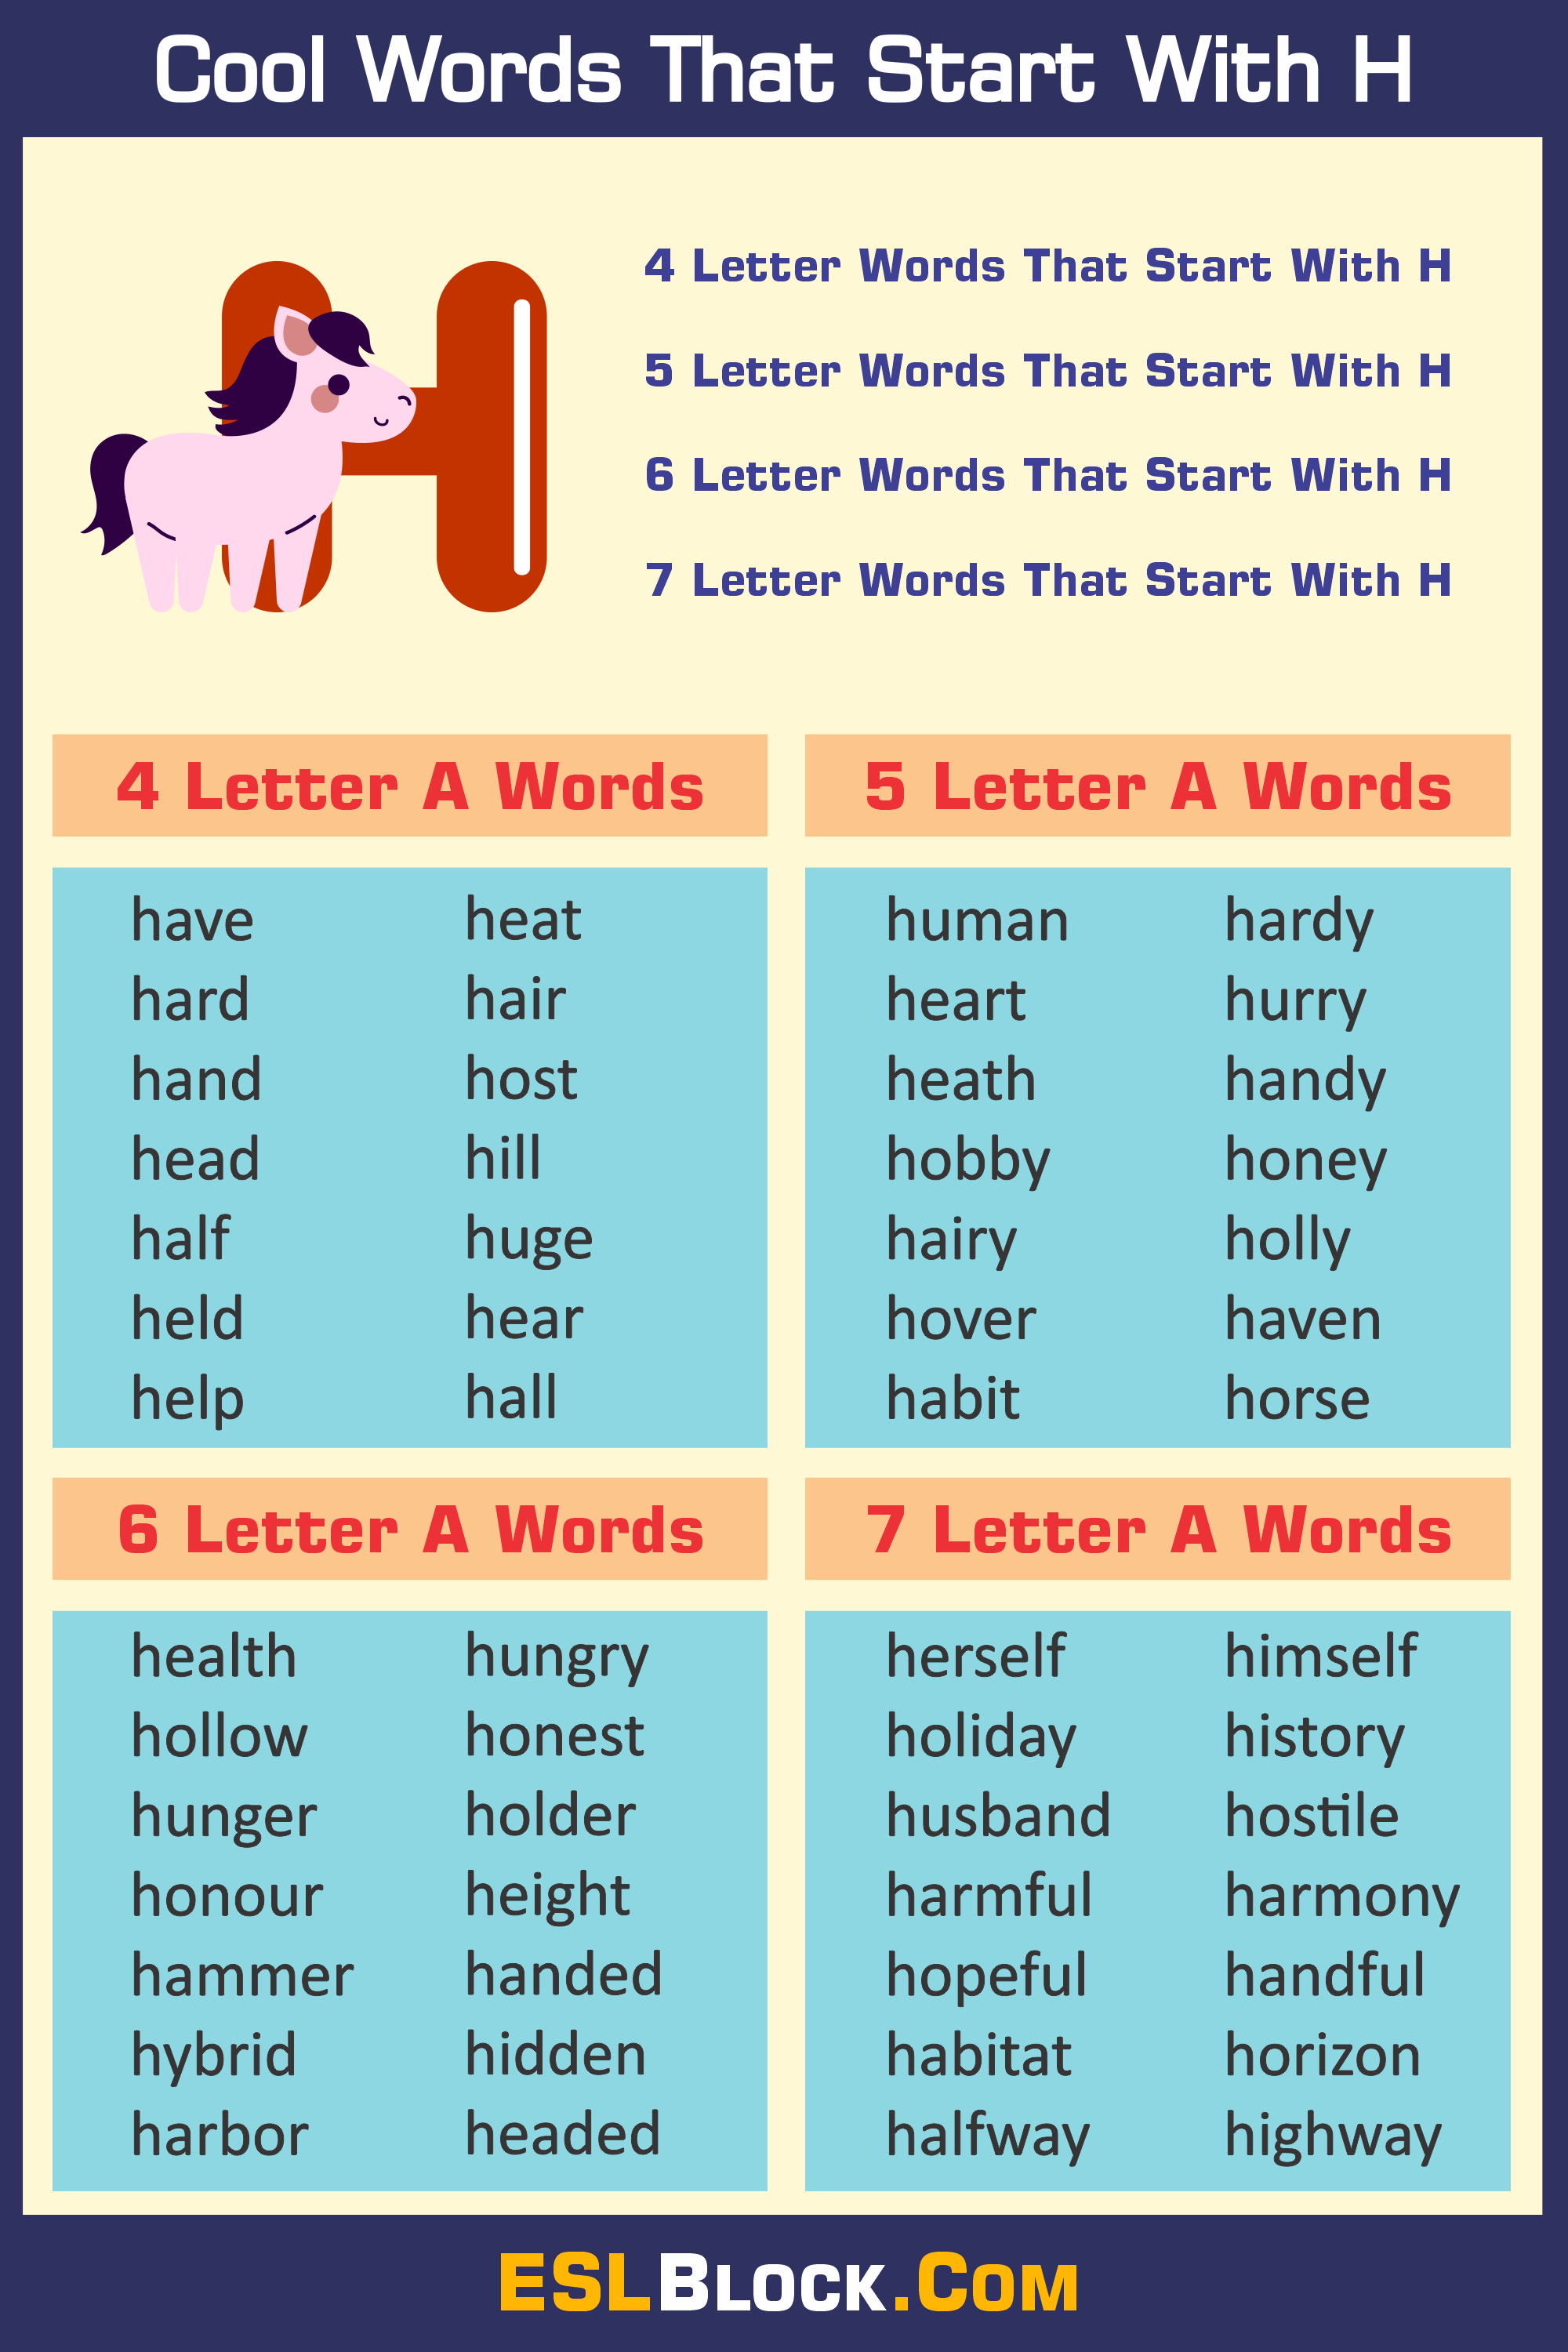 4 Letter Words, 4 Letter Words That Start With H, 5 Letter Words, 5 Letter Words That Start With H, 6 Letter Words, 6 Letter Words That Start With H, 7 Letter Words, 7 Letter Words That Start With H, Awesome Cool Words, Christmas Words That Start With H, Cool Words, Describing Words That Start With H, Descriptive Words That Start With H, English Words, Five Letter Words Starting with H, Good Words That Start With H, H Words, Nice Words That Start With H, Positive Words That Start With H, Unique Words, Word Dictionary, Words That Start With H, Words That Start With H to Describe Someone